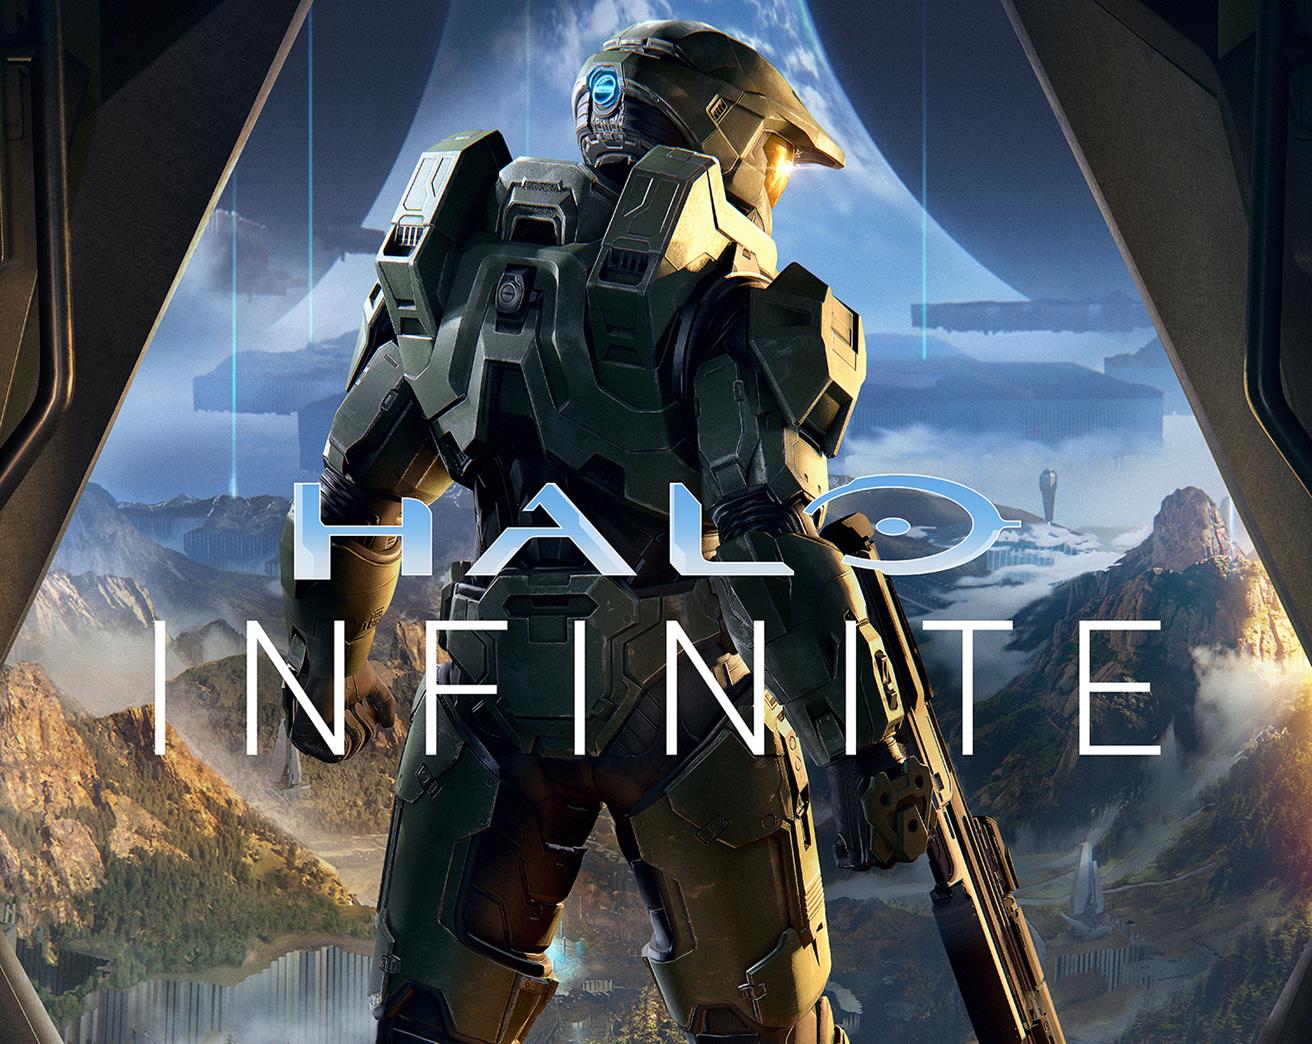 Halo Infinite's next big moment is E3 but beta tests are